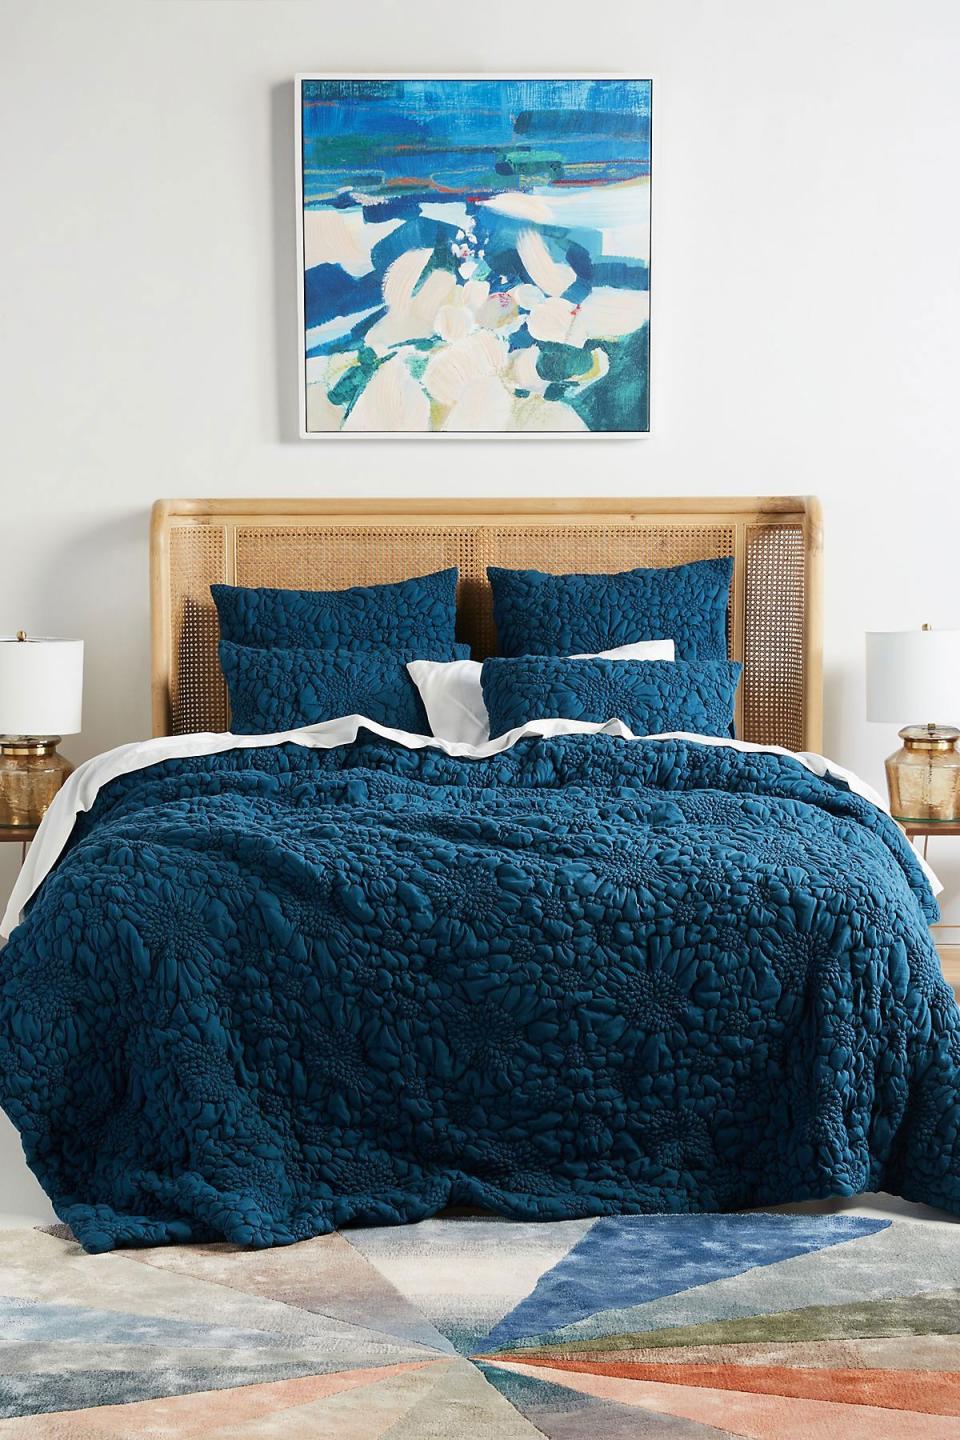 9 Best Bed Quilts That Will Give Your Room an Update